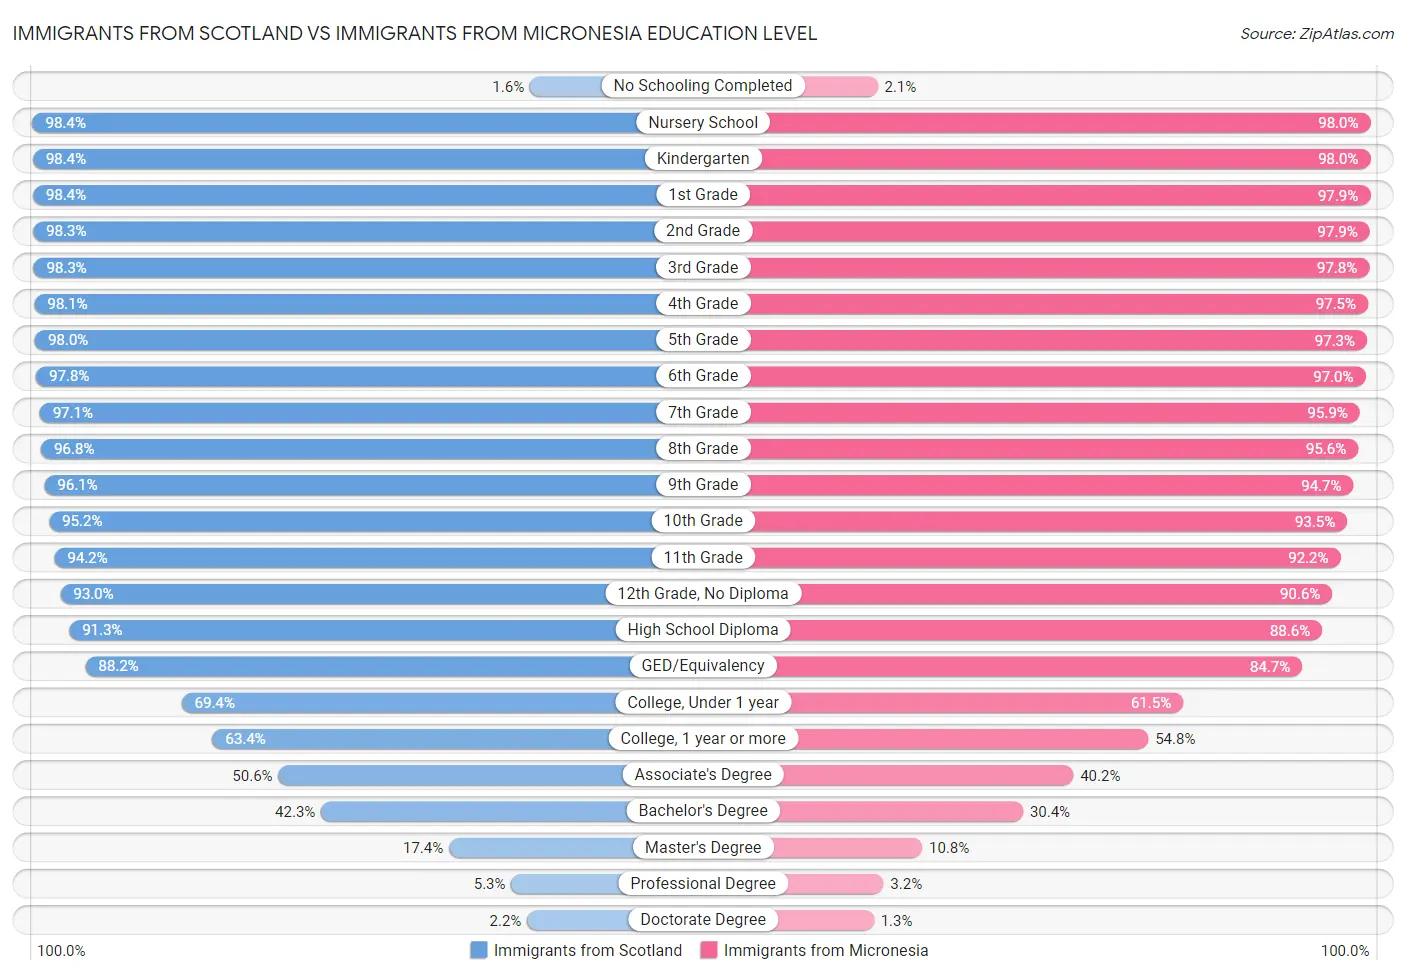 Immigrants from Scotland vs Immigrants from Micronesia Education Level